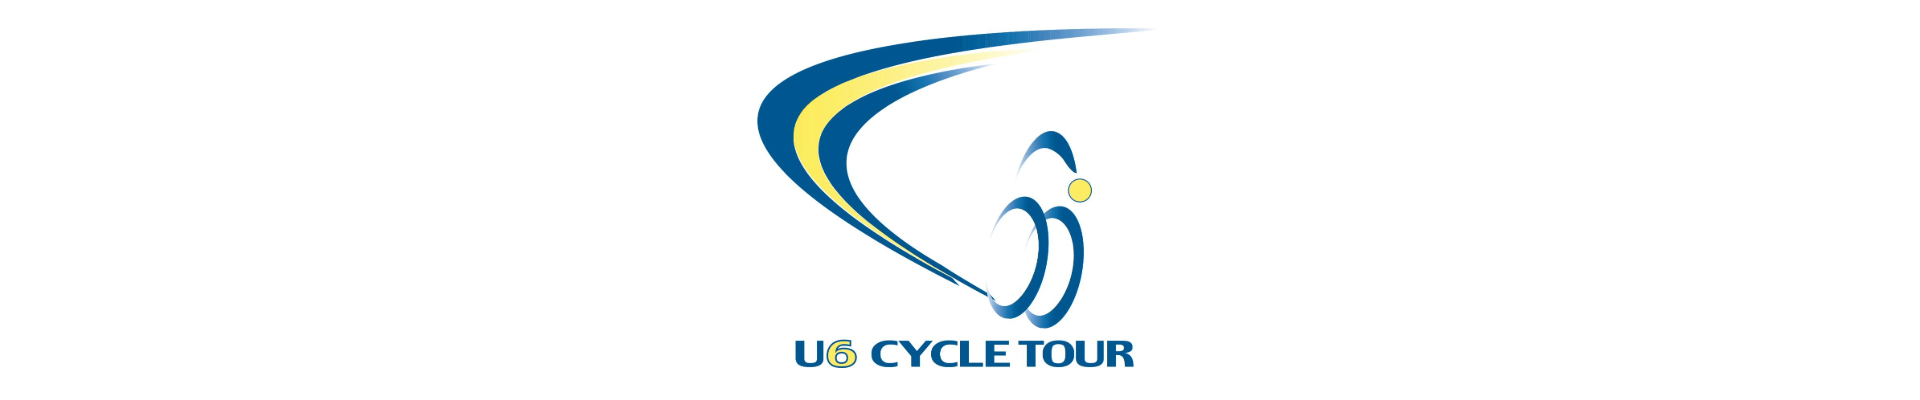 U6 Cycle Tour - stage 6